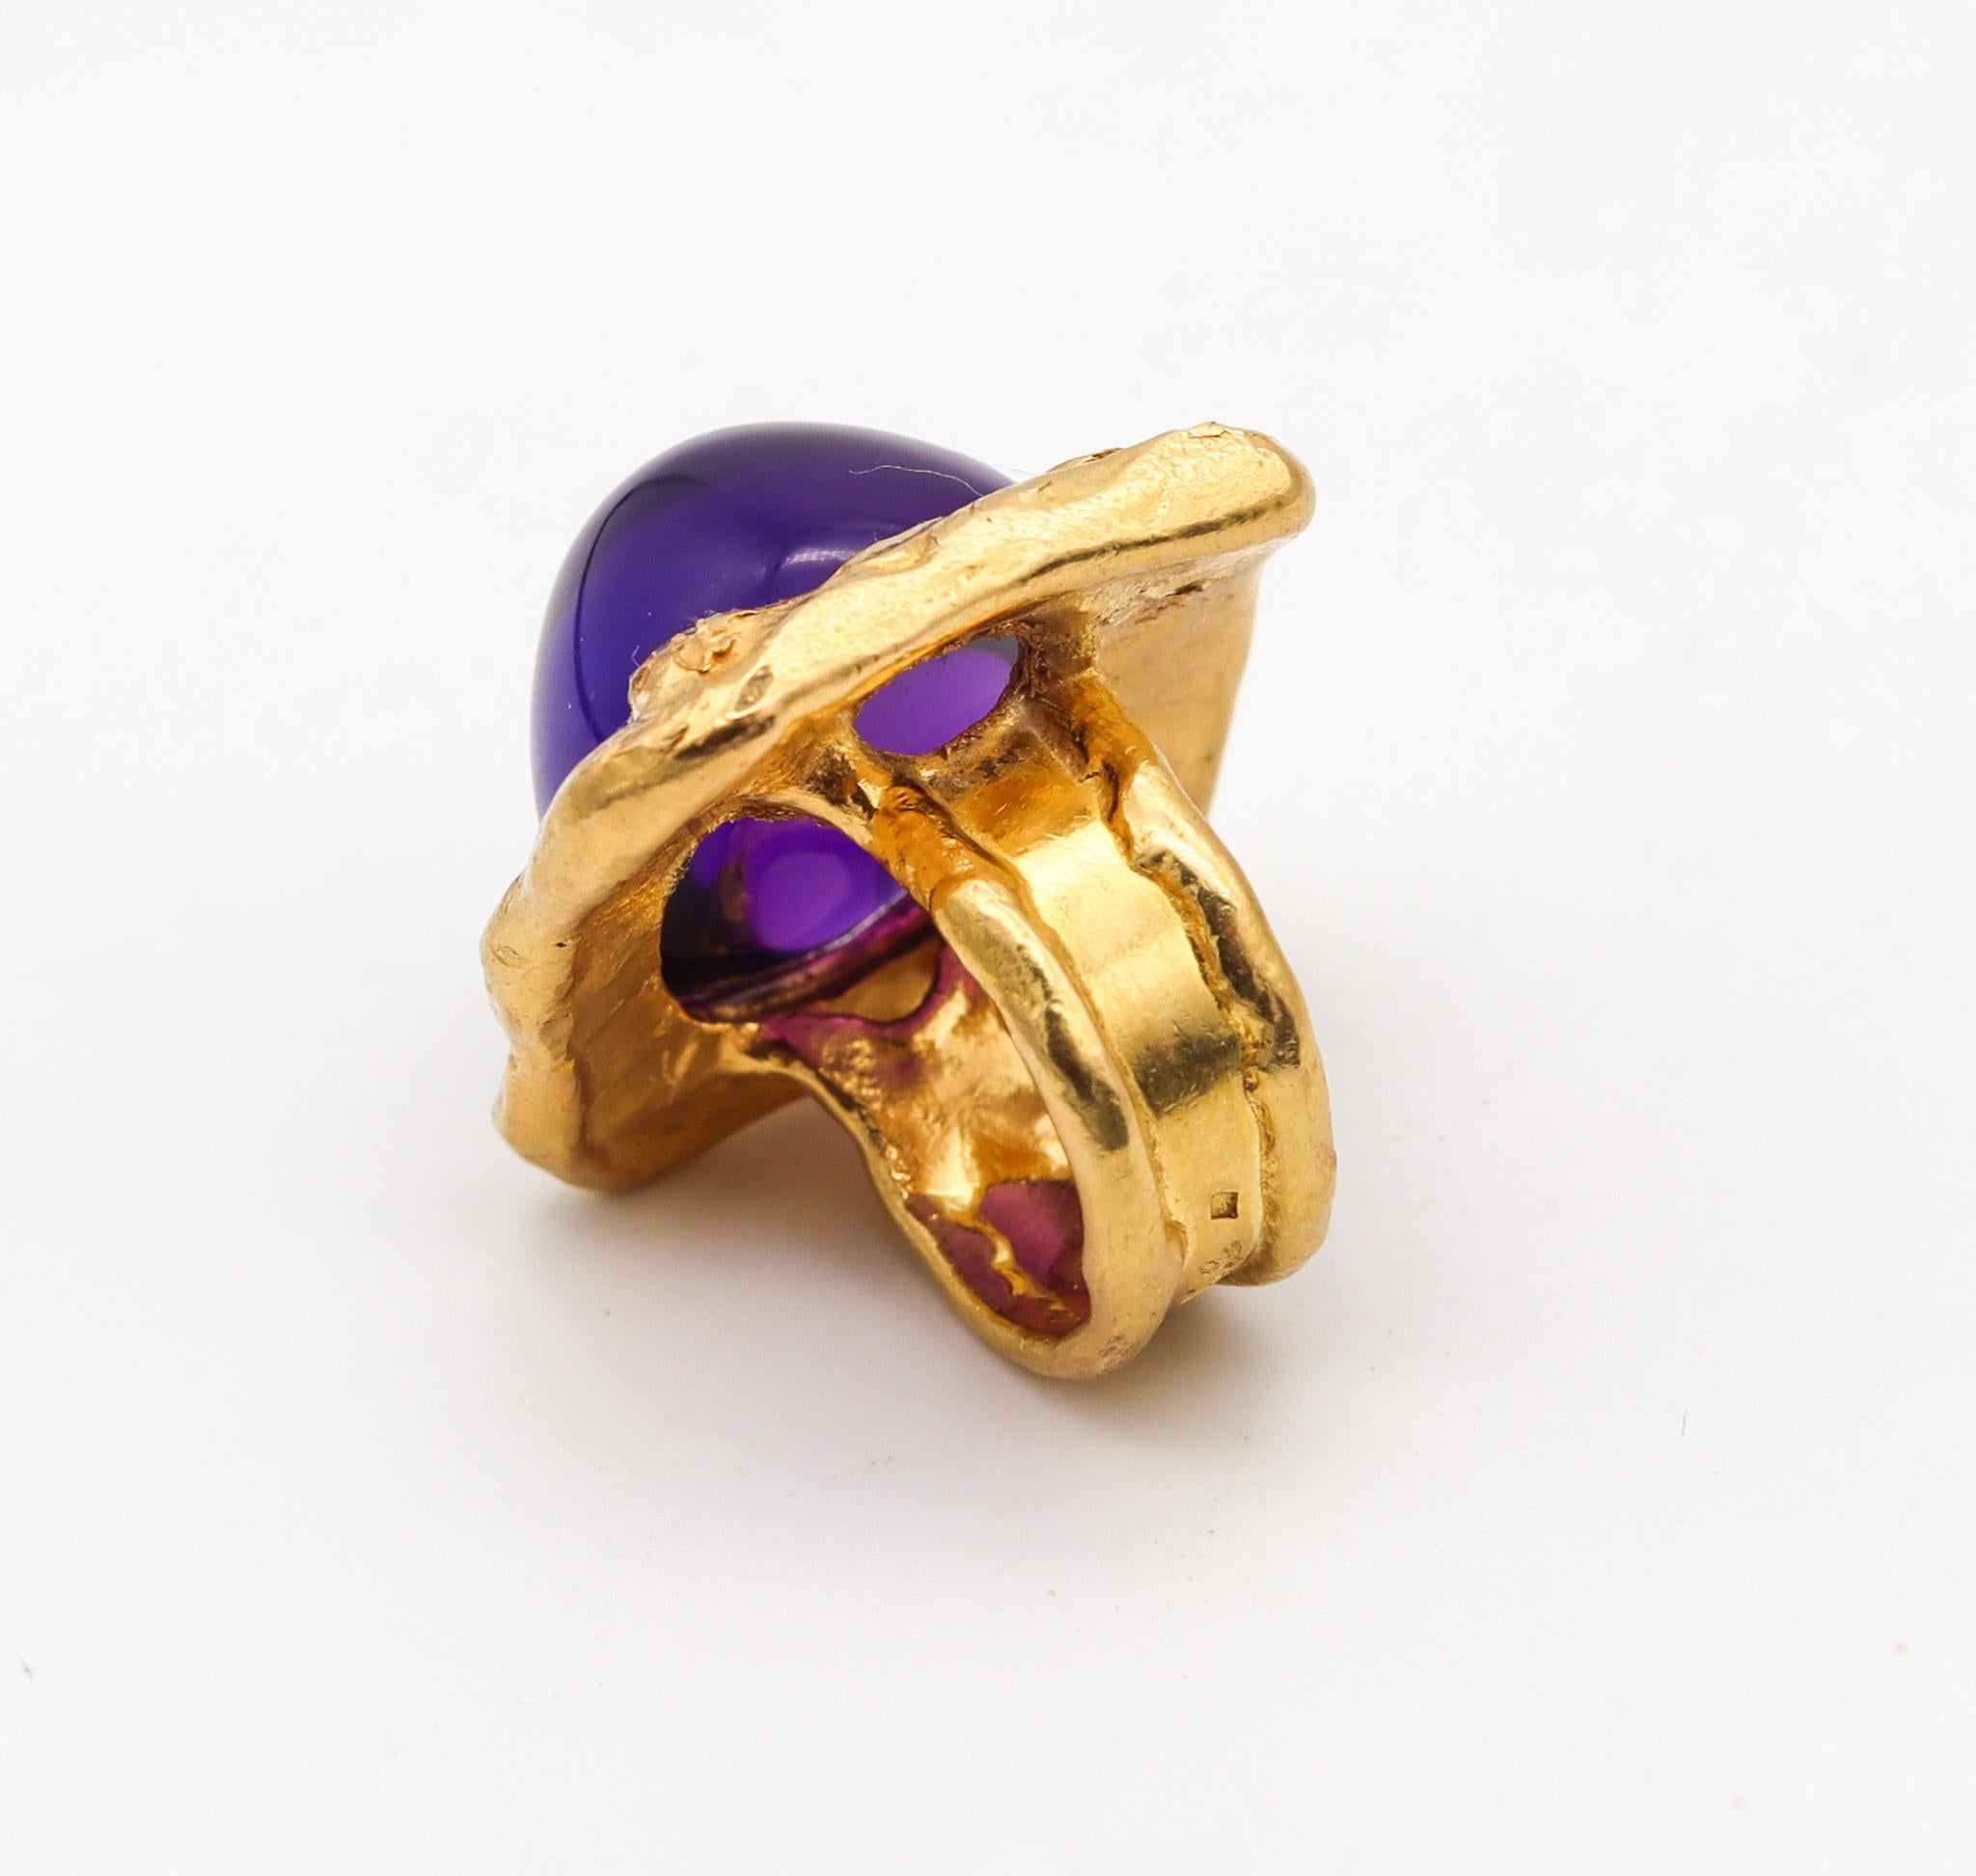 Jean Mahie 1977 Paris Rare Sculptural Cocktail Ring in Solid 22Kt Yellow Gold 2